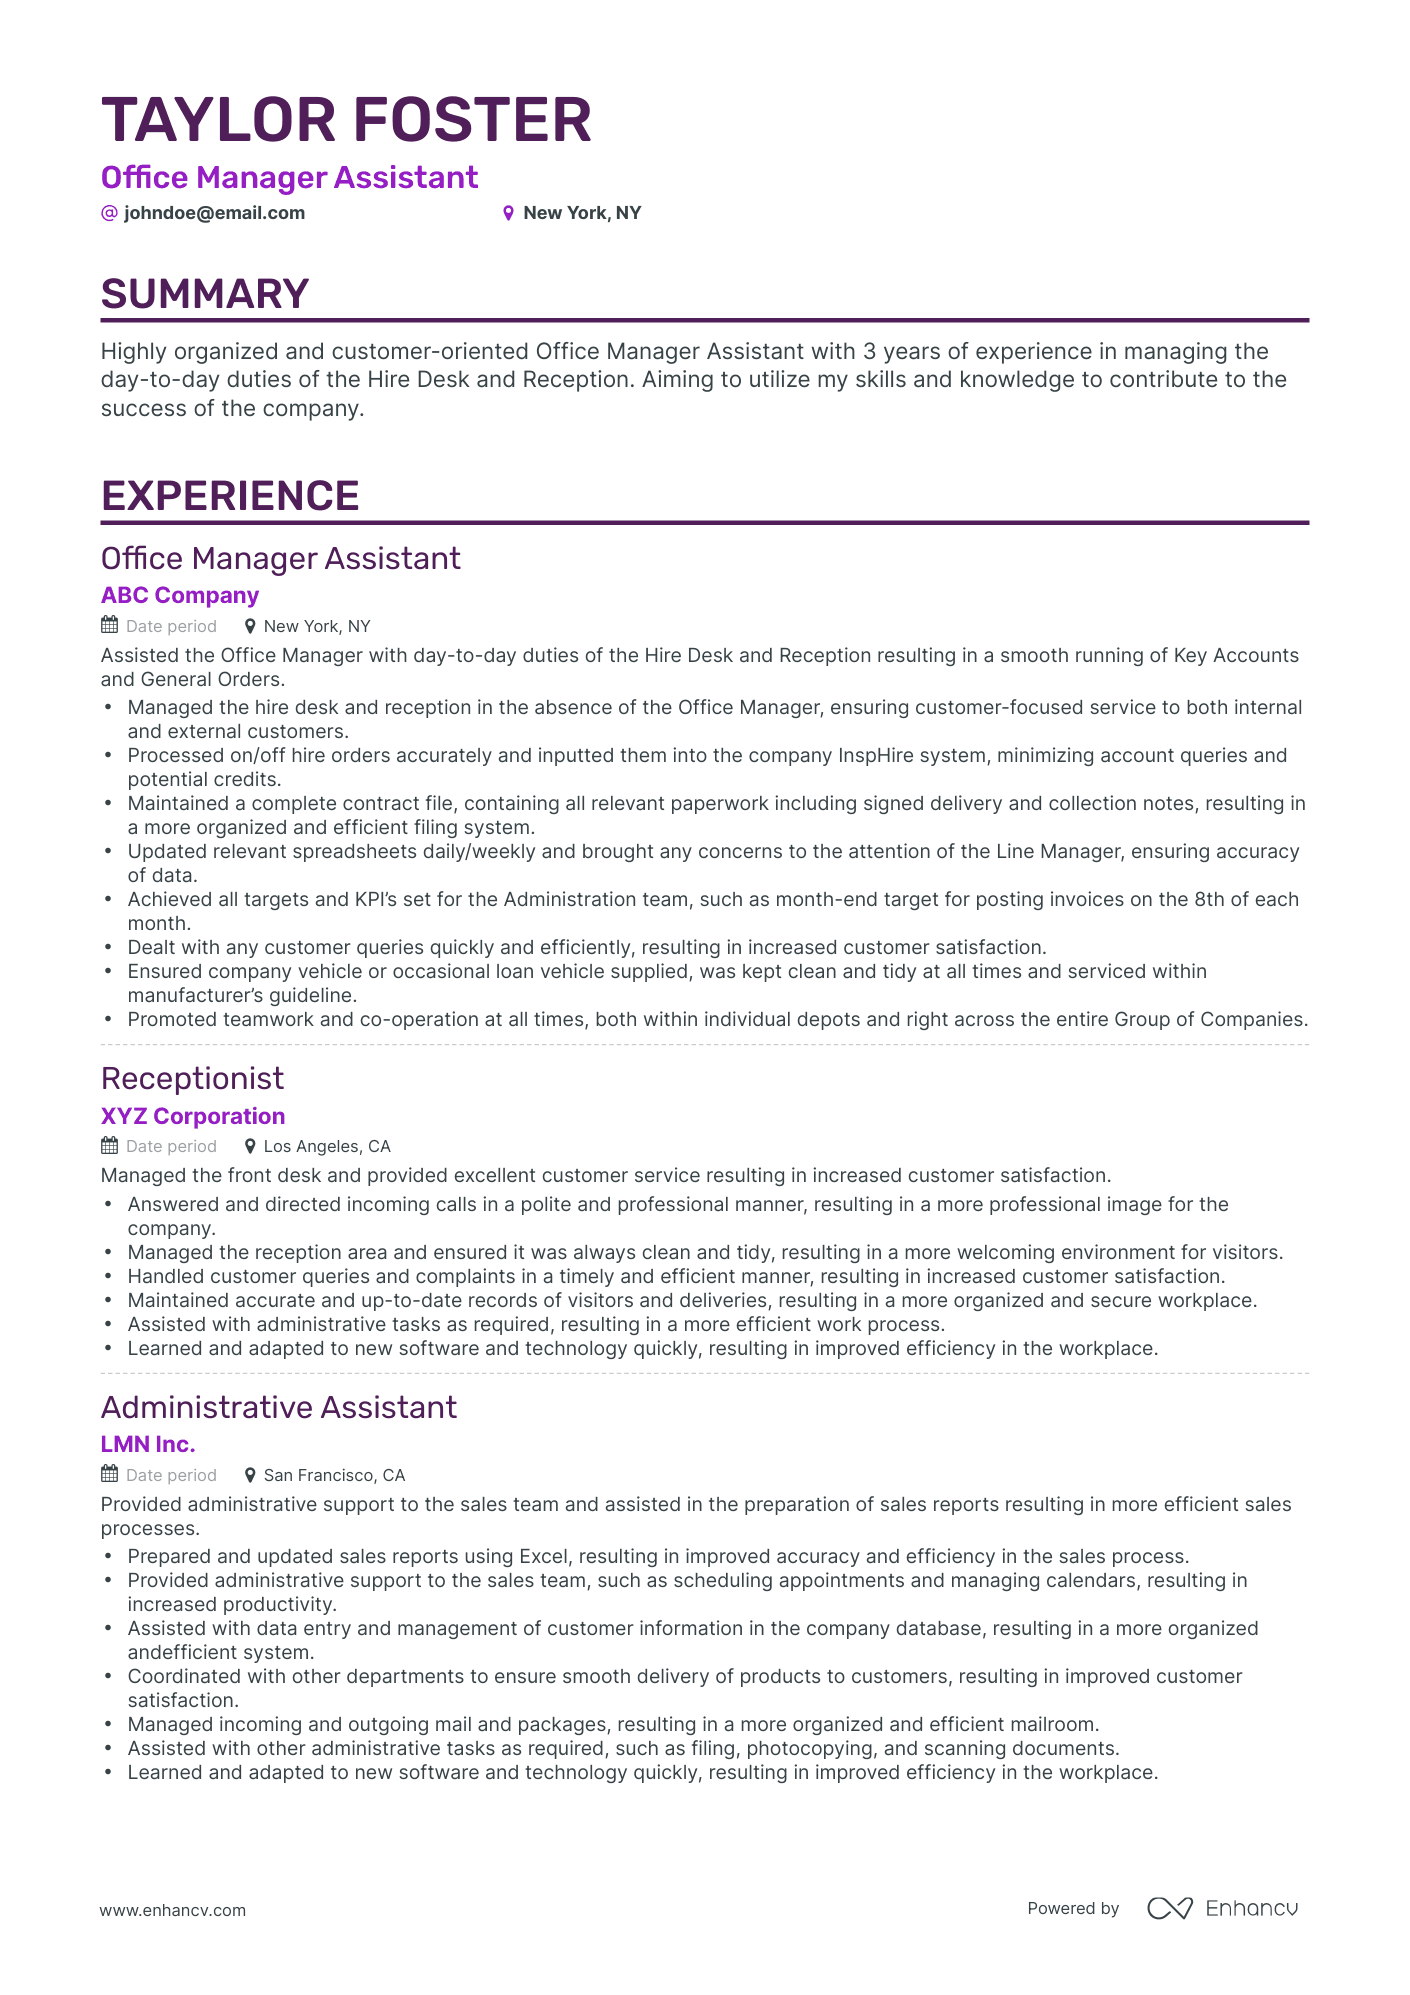 Classic Office Manager Assistant Resume Template